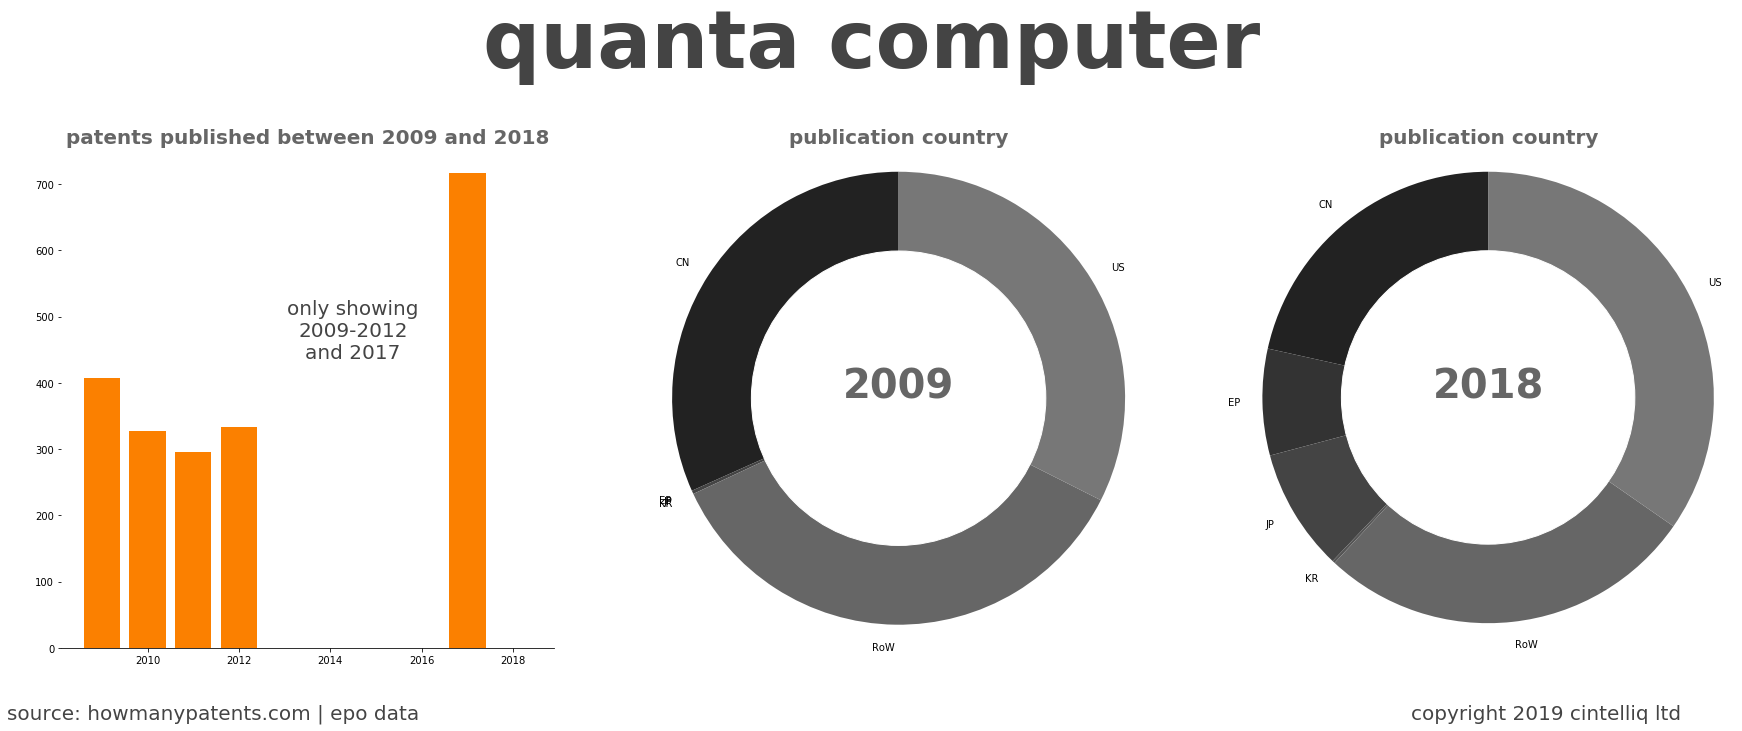 summary of patents for Quanta Computer